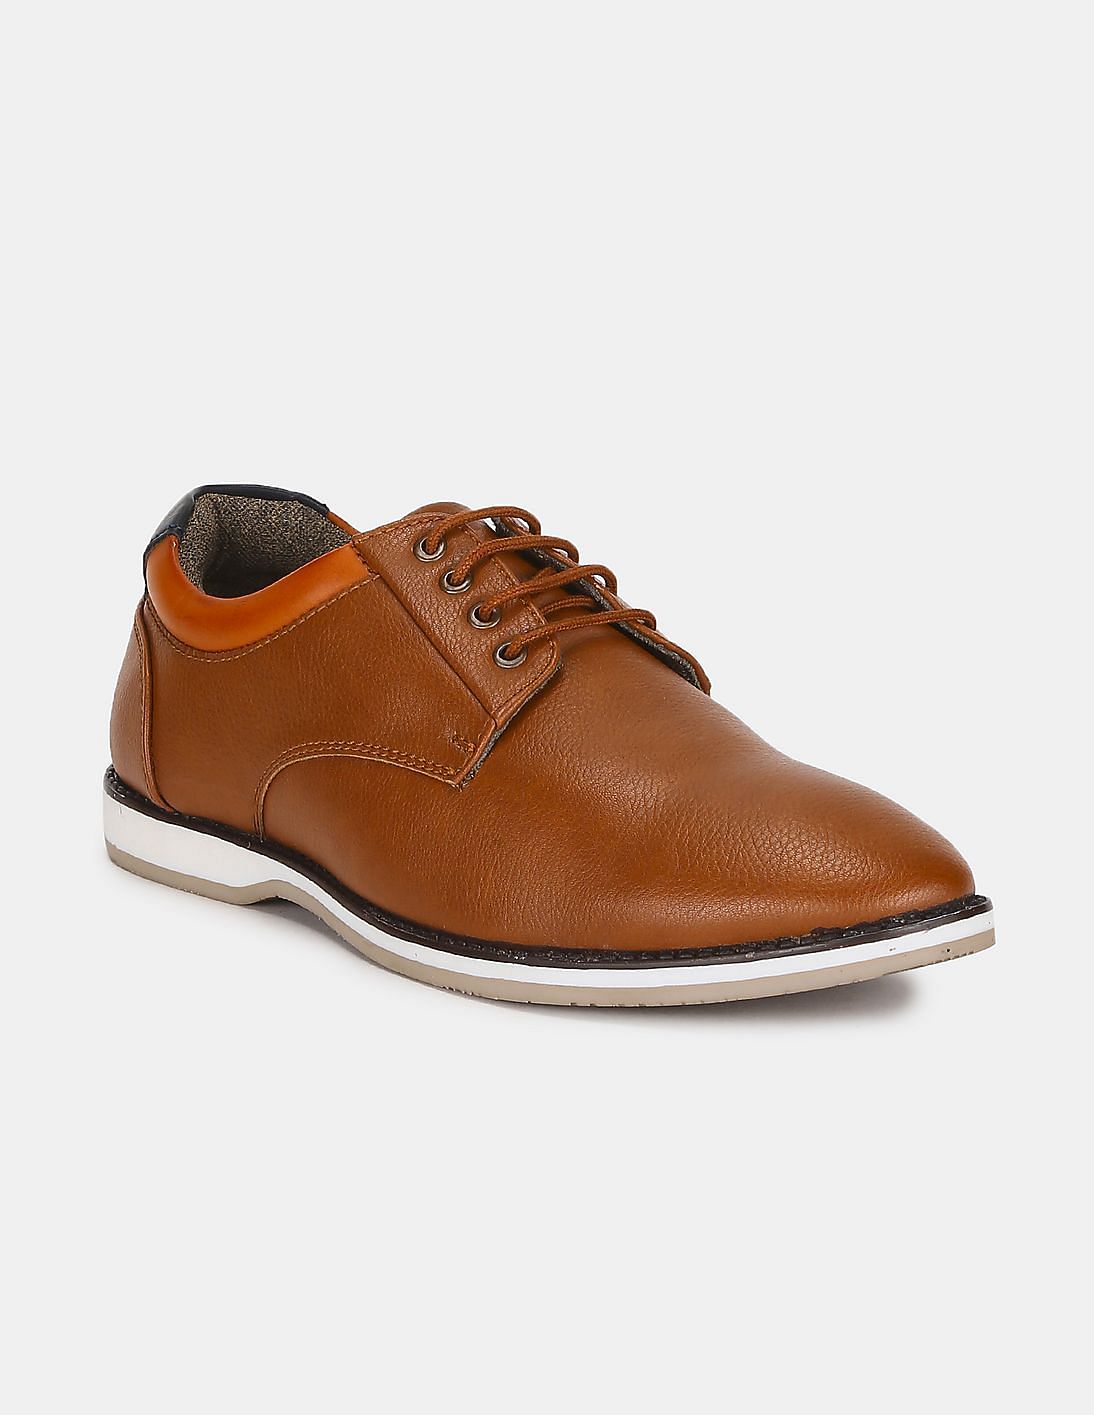 Buy Ruggers Men Tan Round Toe Casual Shoes - NNNOW.com